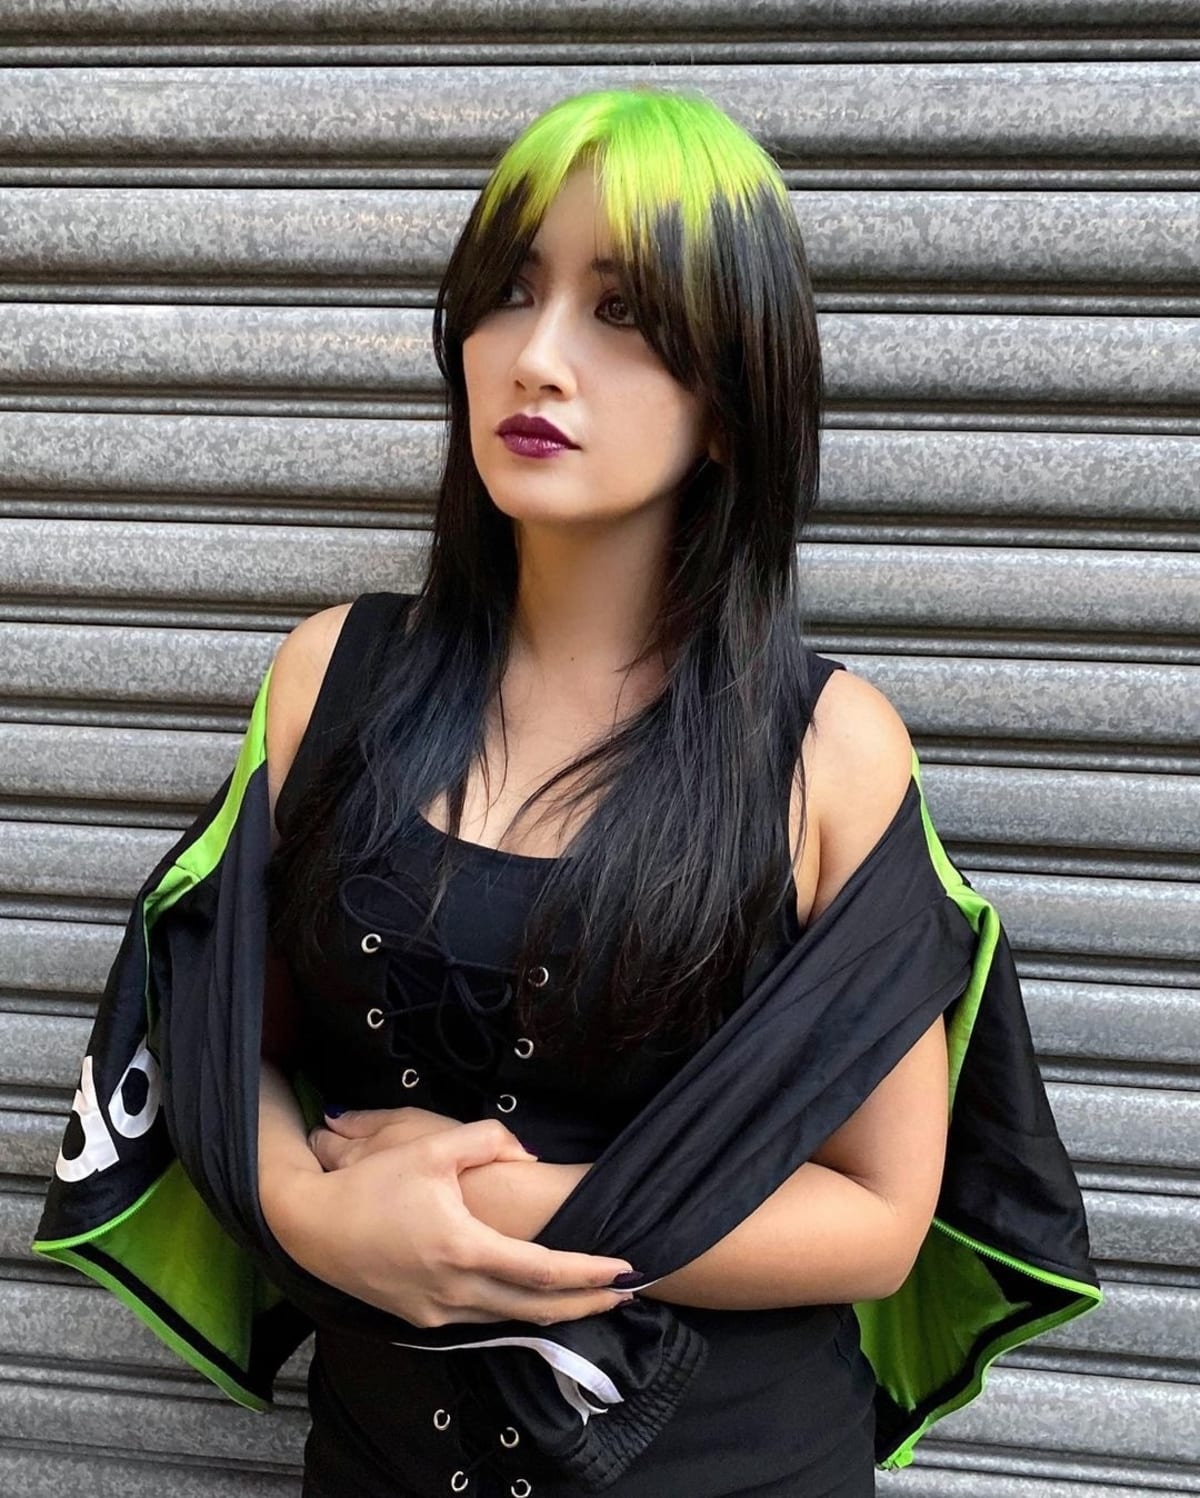 Bright green roots inspired by Billie Eilish